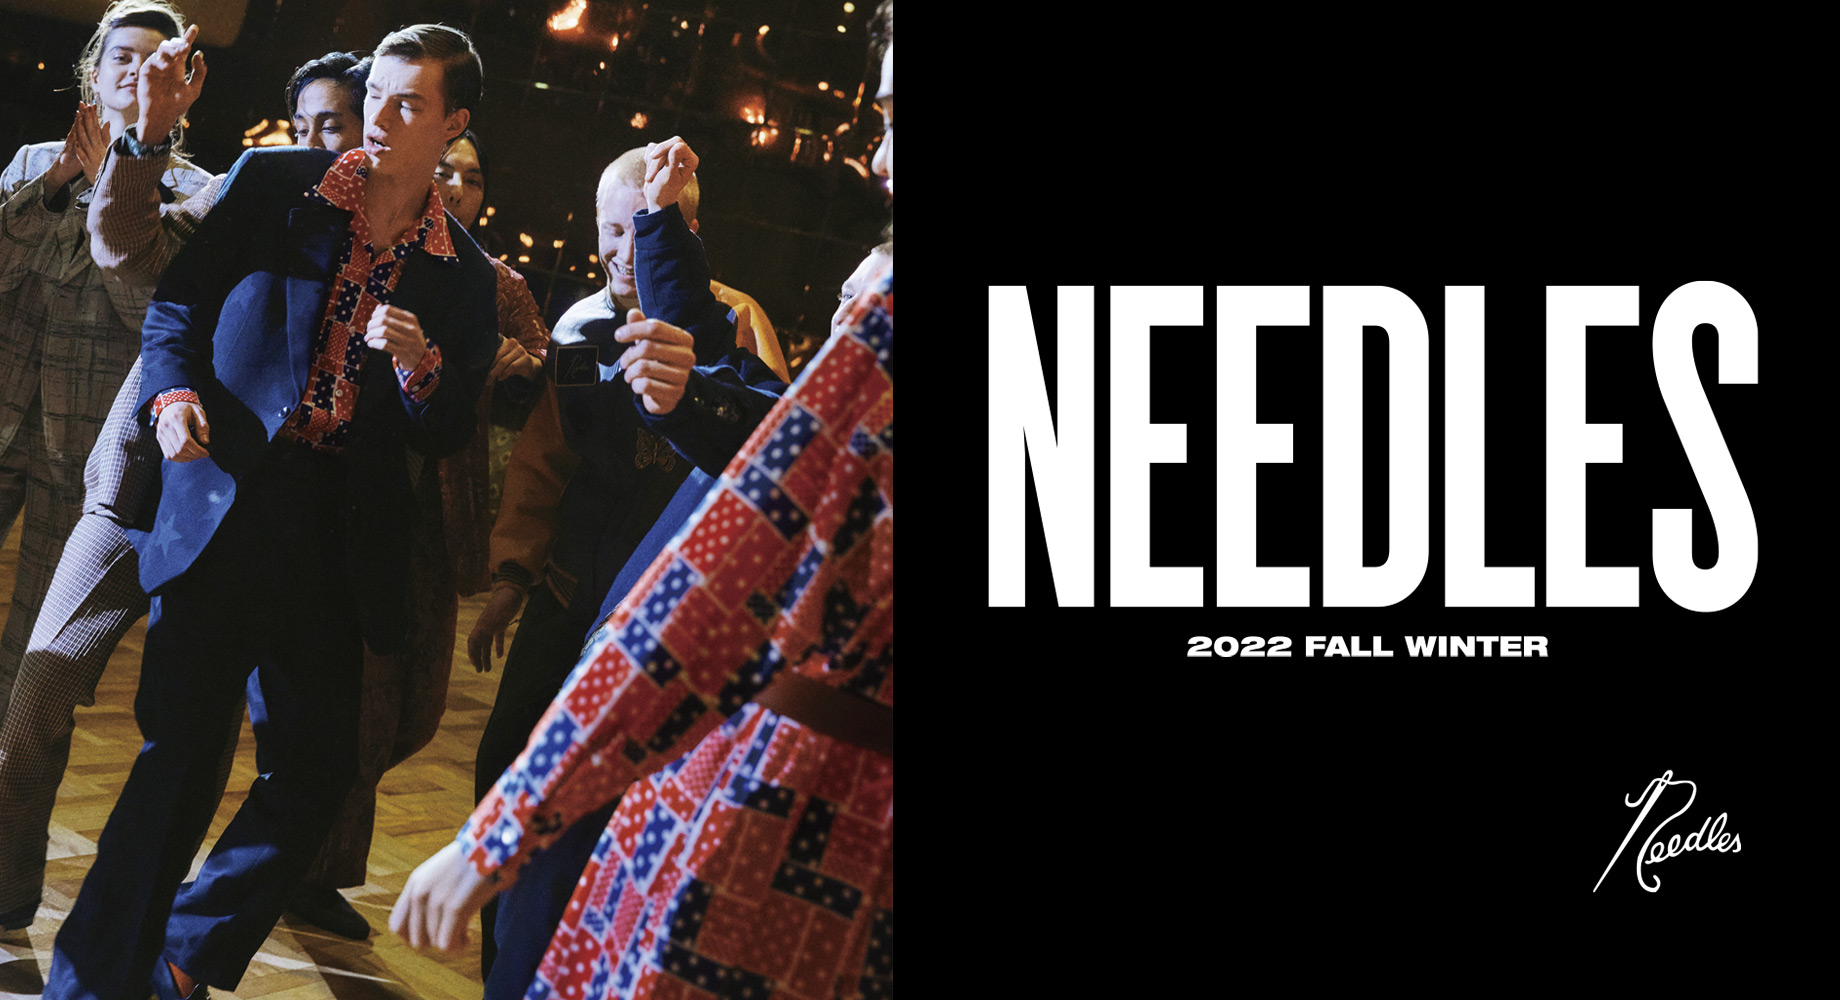 〈NEEDLES〉2022 FALL WINTER COLLECTION